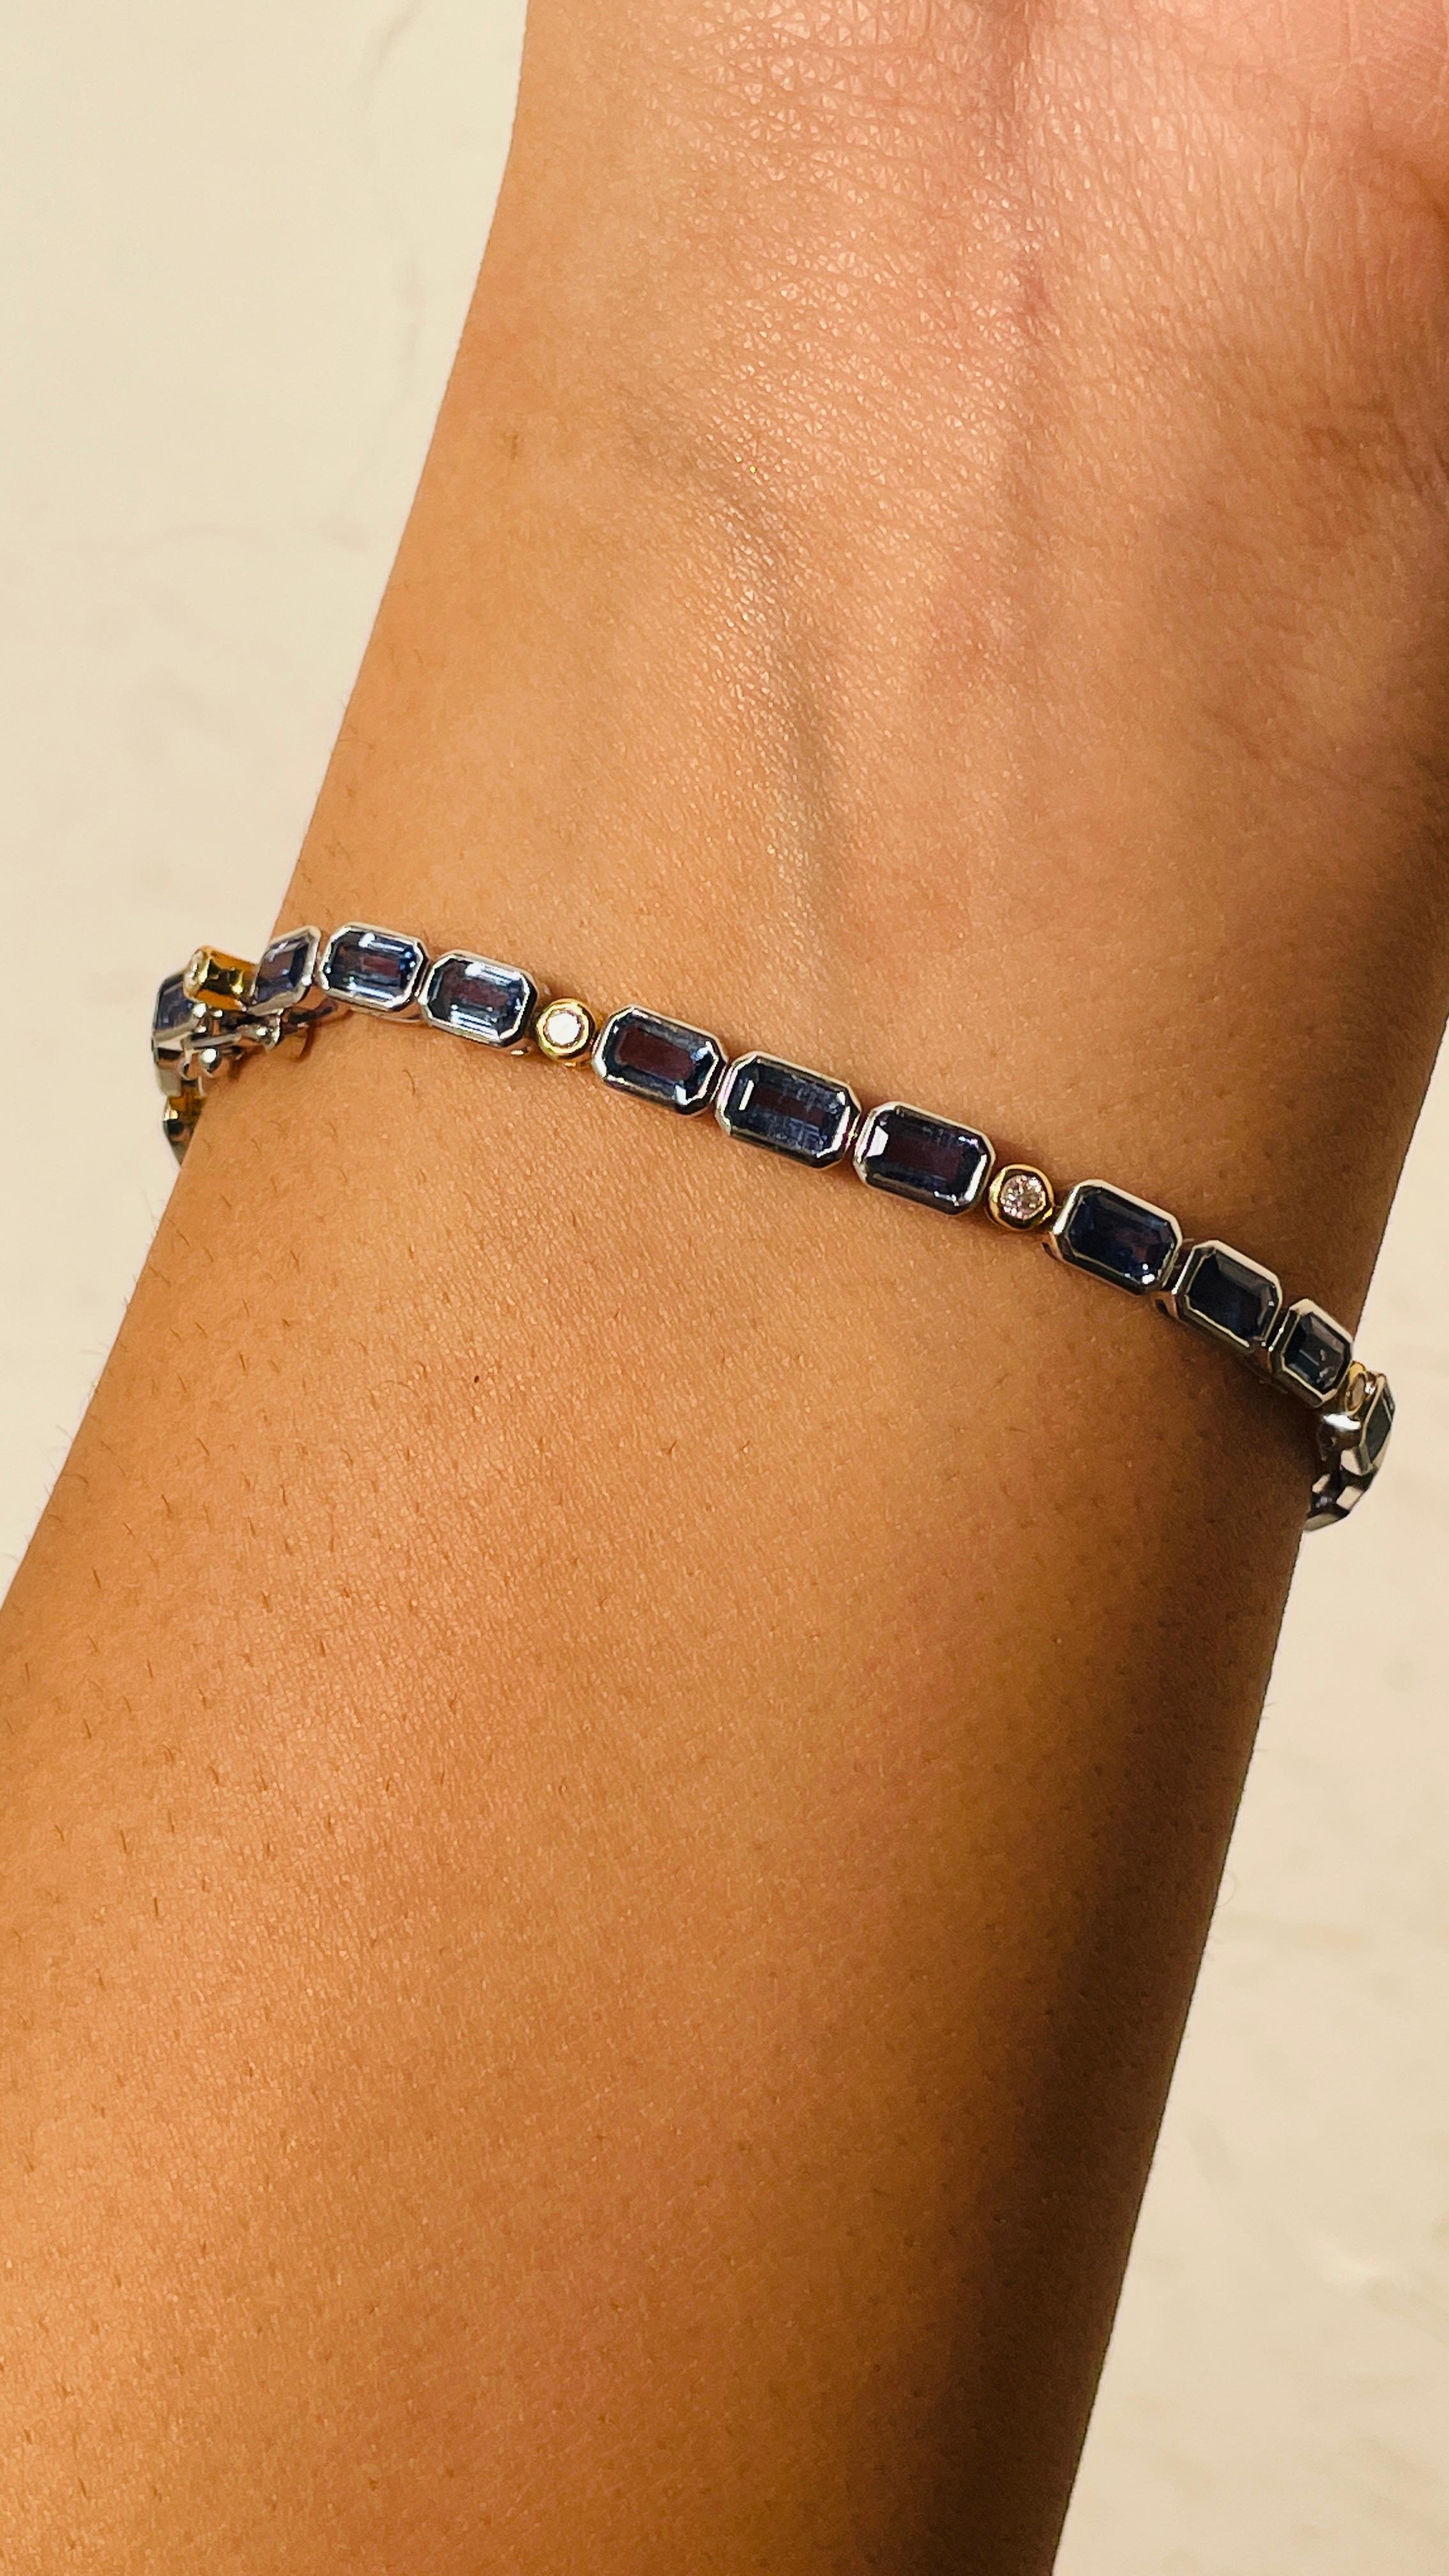 Blue Sapphire bracelet in 18K Gold. It has a perfect octagon cut gemstone studded with diamonds to make you stand out on any occasion or an event. 
A tennis bracelet is an essential piece of jewelry when it comes to your wedding day. The sleek and